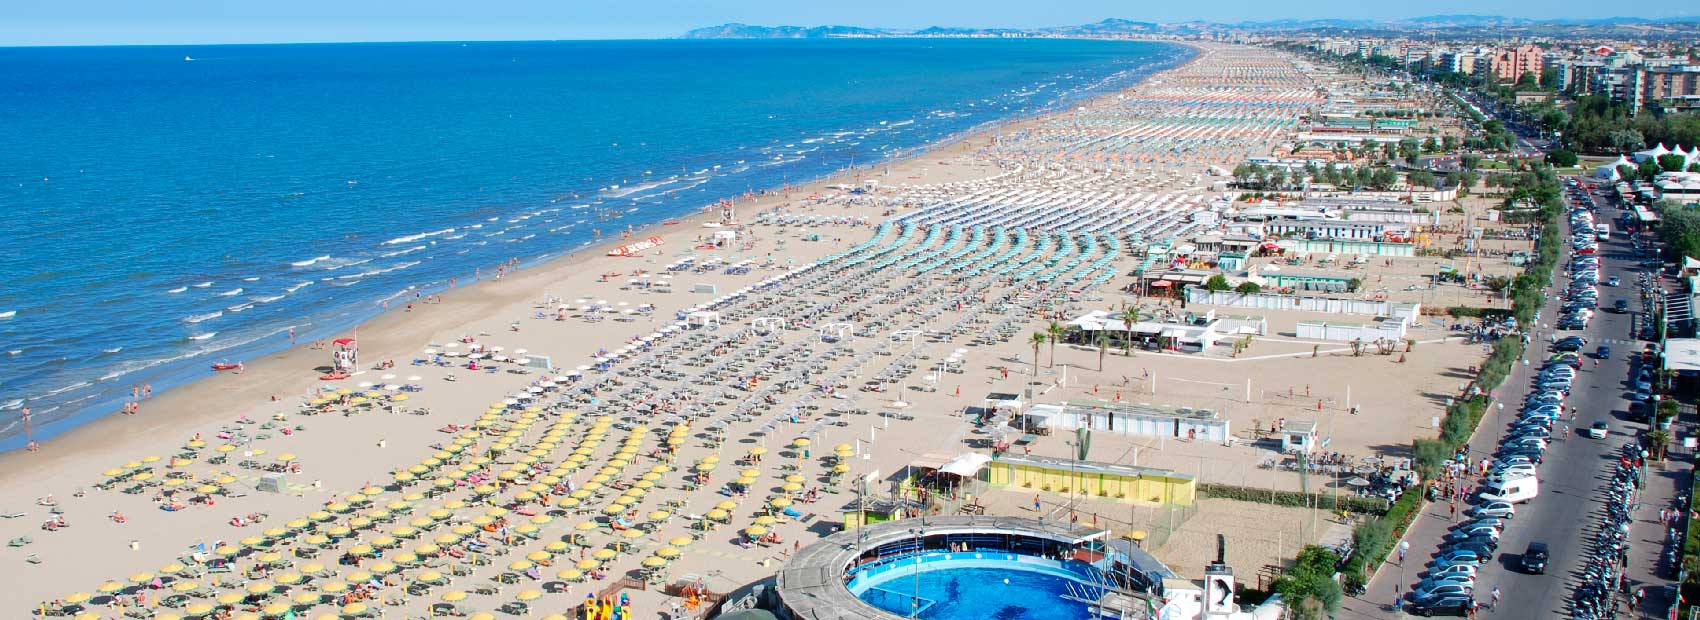 The Rimini beach is the most sought after destination for summer holidays - and it's nobody's wonder!